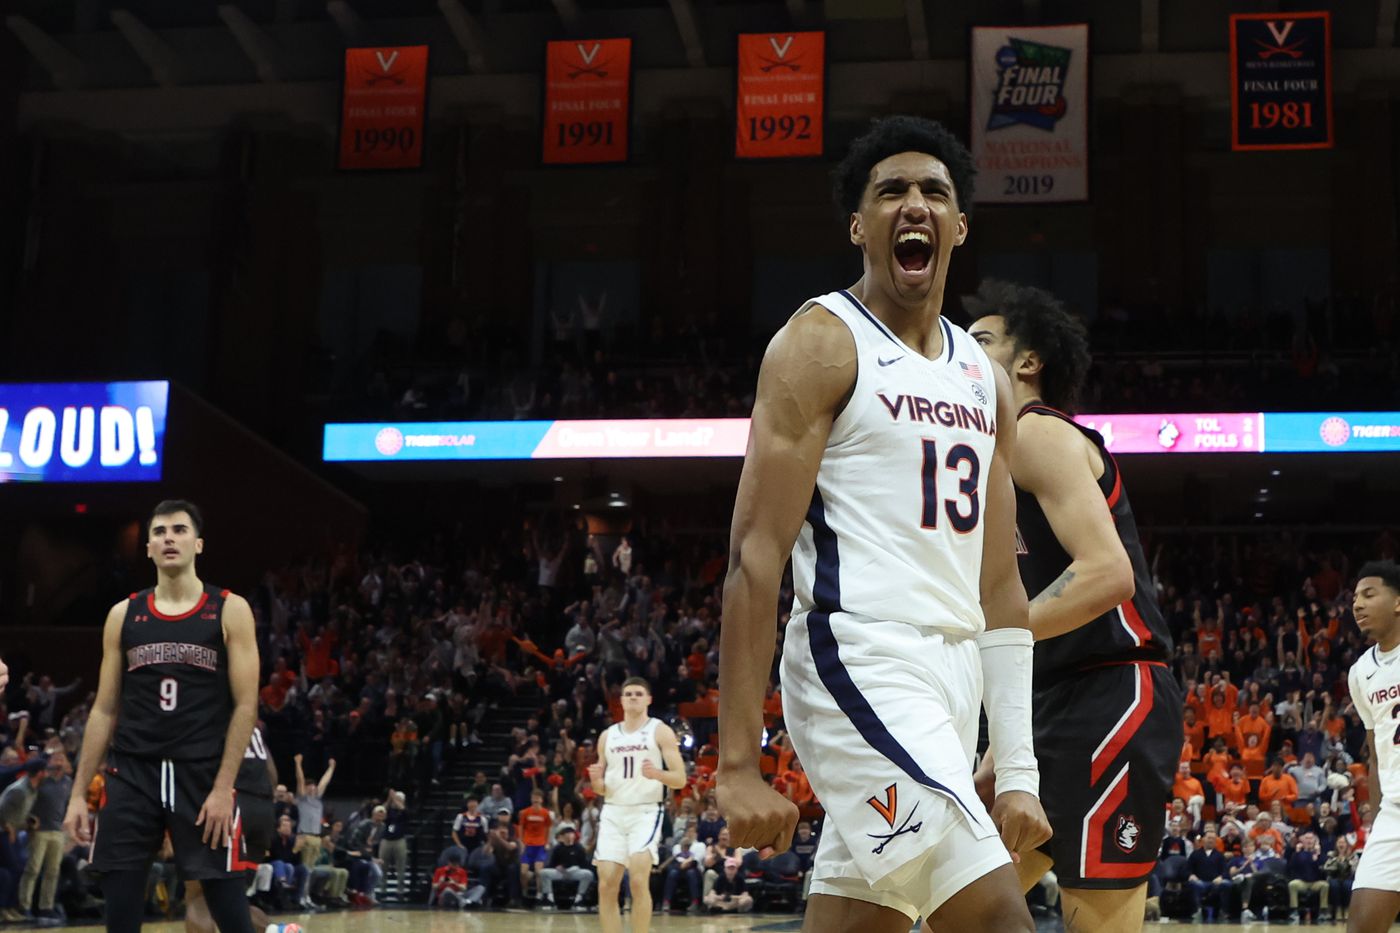 Five takeaways from UVA basketball’s close loss to Northeastern